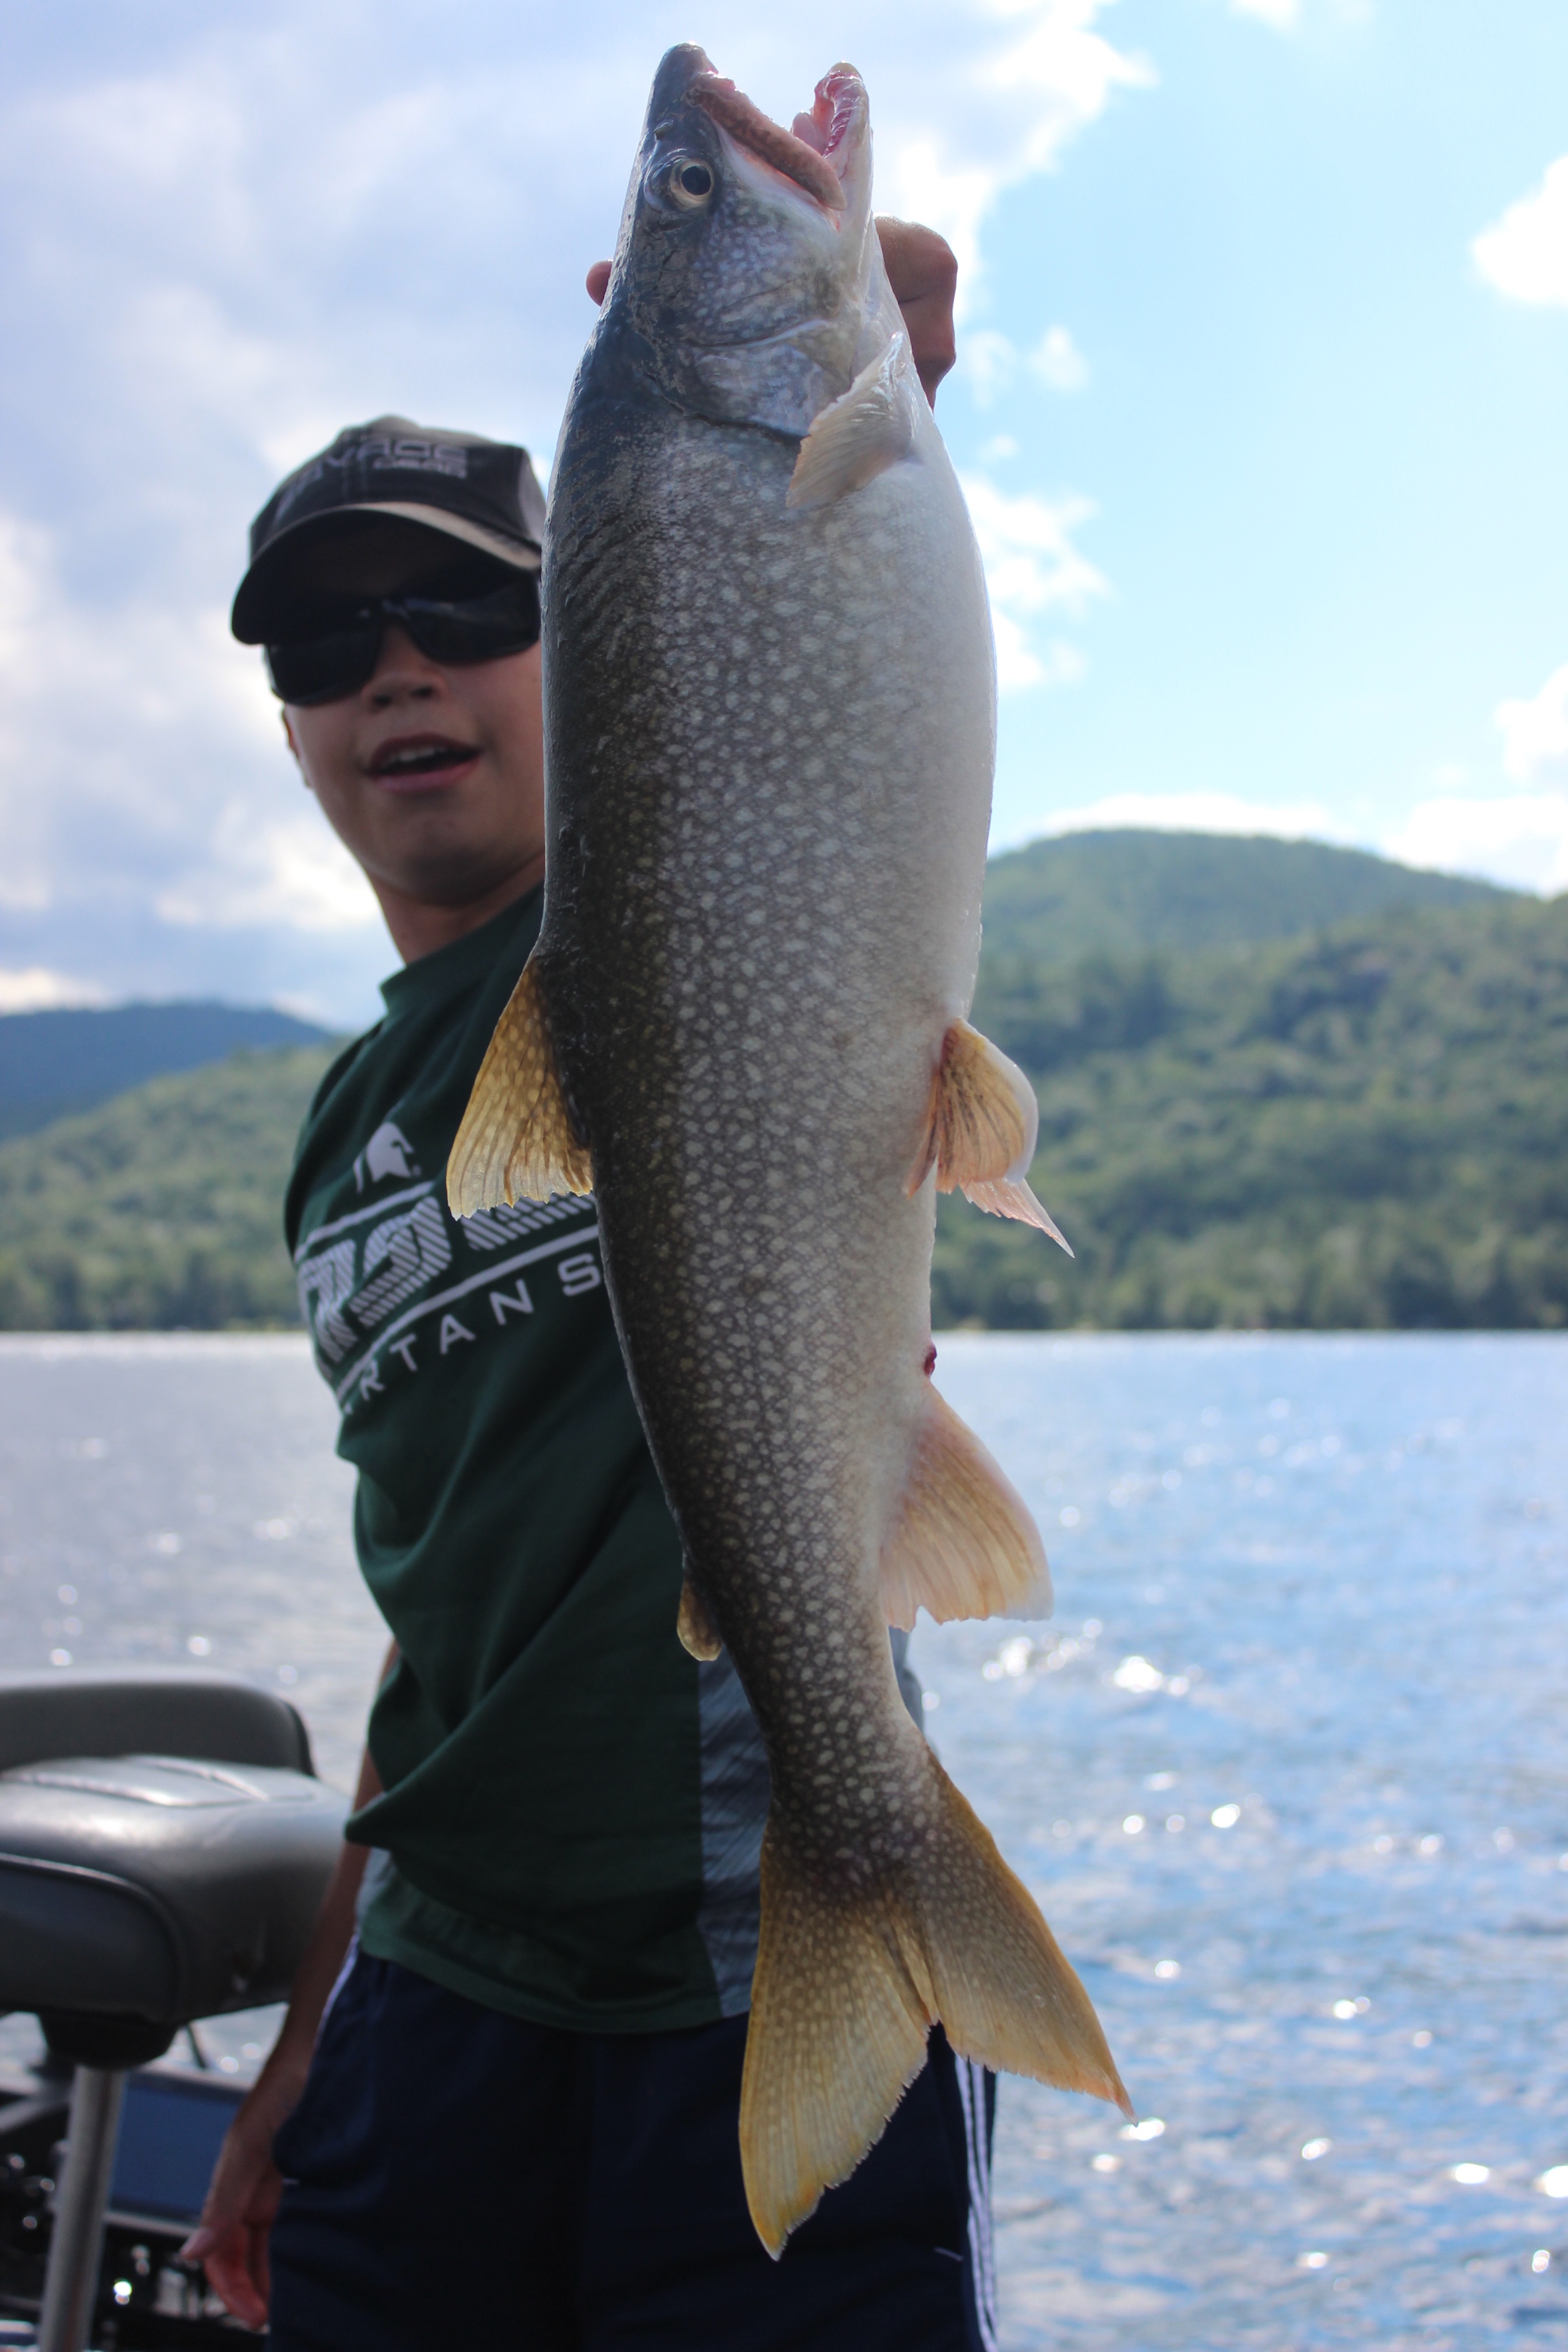 Dialing in the Lake Trout Jigging Spoon Bite - Lake George